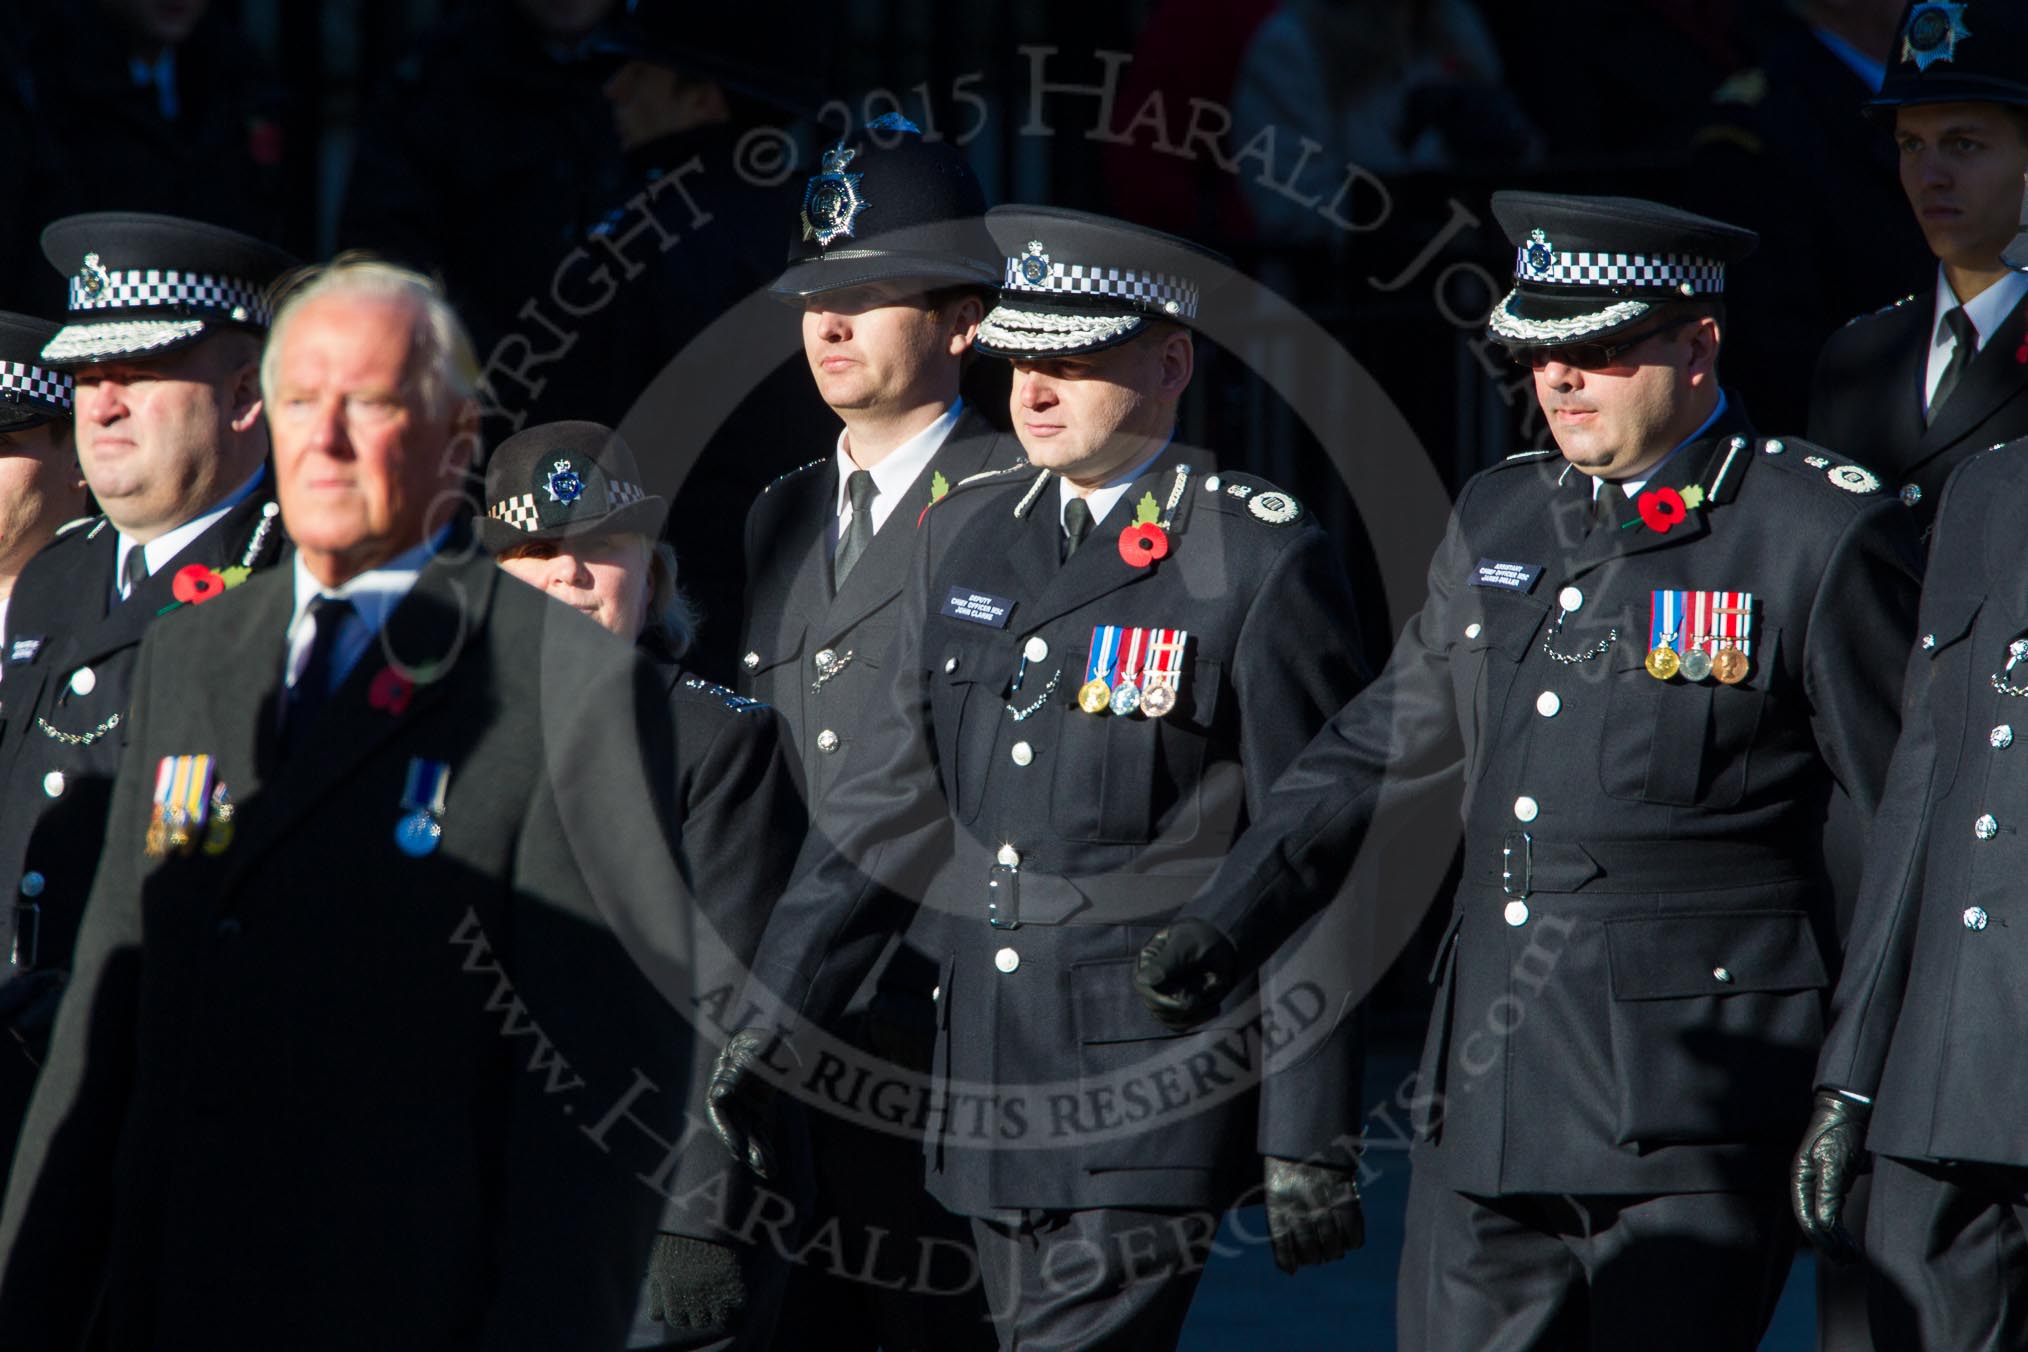 Remembrance Sunday Cenotaph March Past 2013: M13 - Metropolitan Special Constabulary. Special Sergeant Patricia Johnson, Deputy Chief Officer John Clarke, and Assistant Chief Officer James Deller..
Press stand opposite the Foreign Office building, Whitehall, London SW1,
London,
Greater London,
United Kingdom,
on 10 November 2013 at 12:10, image #1957